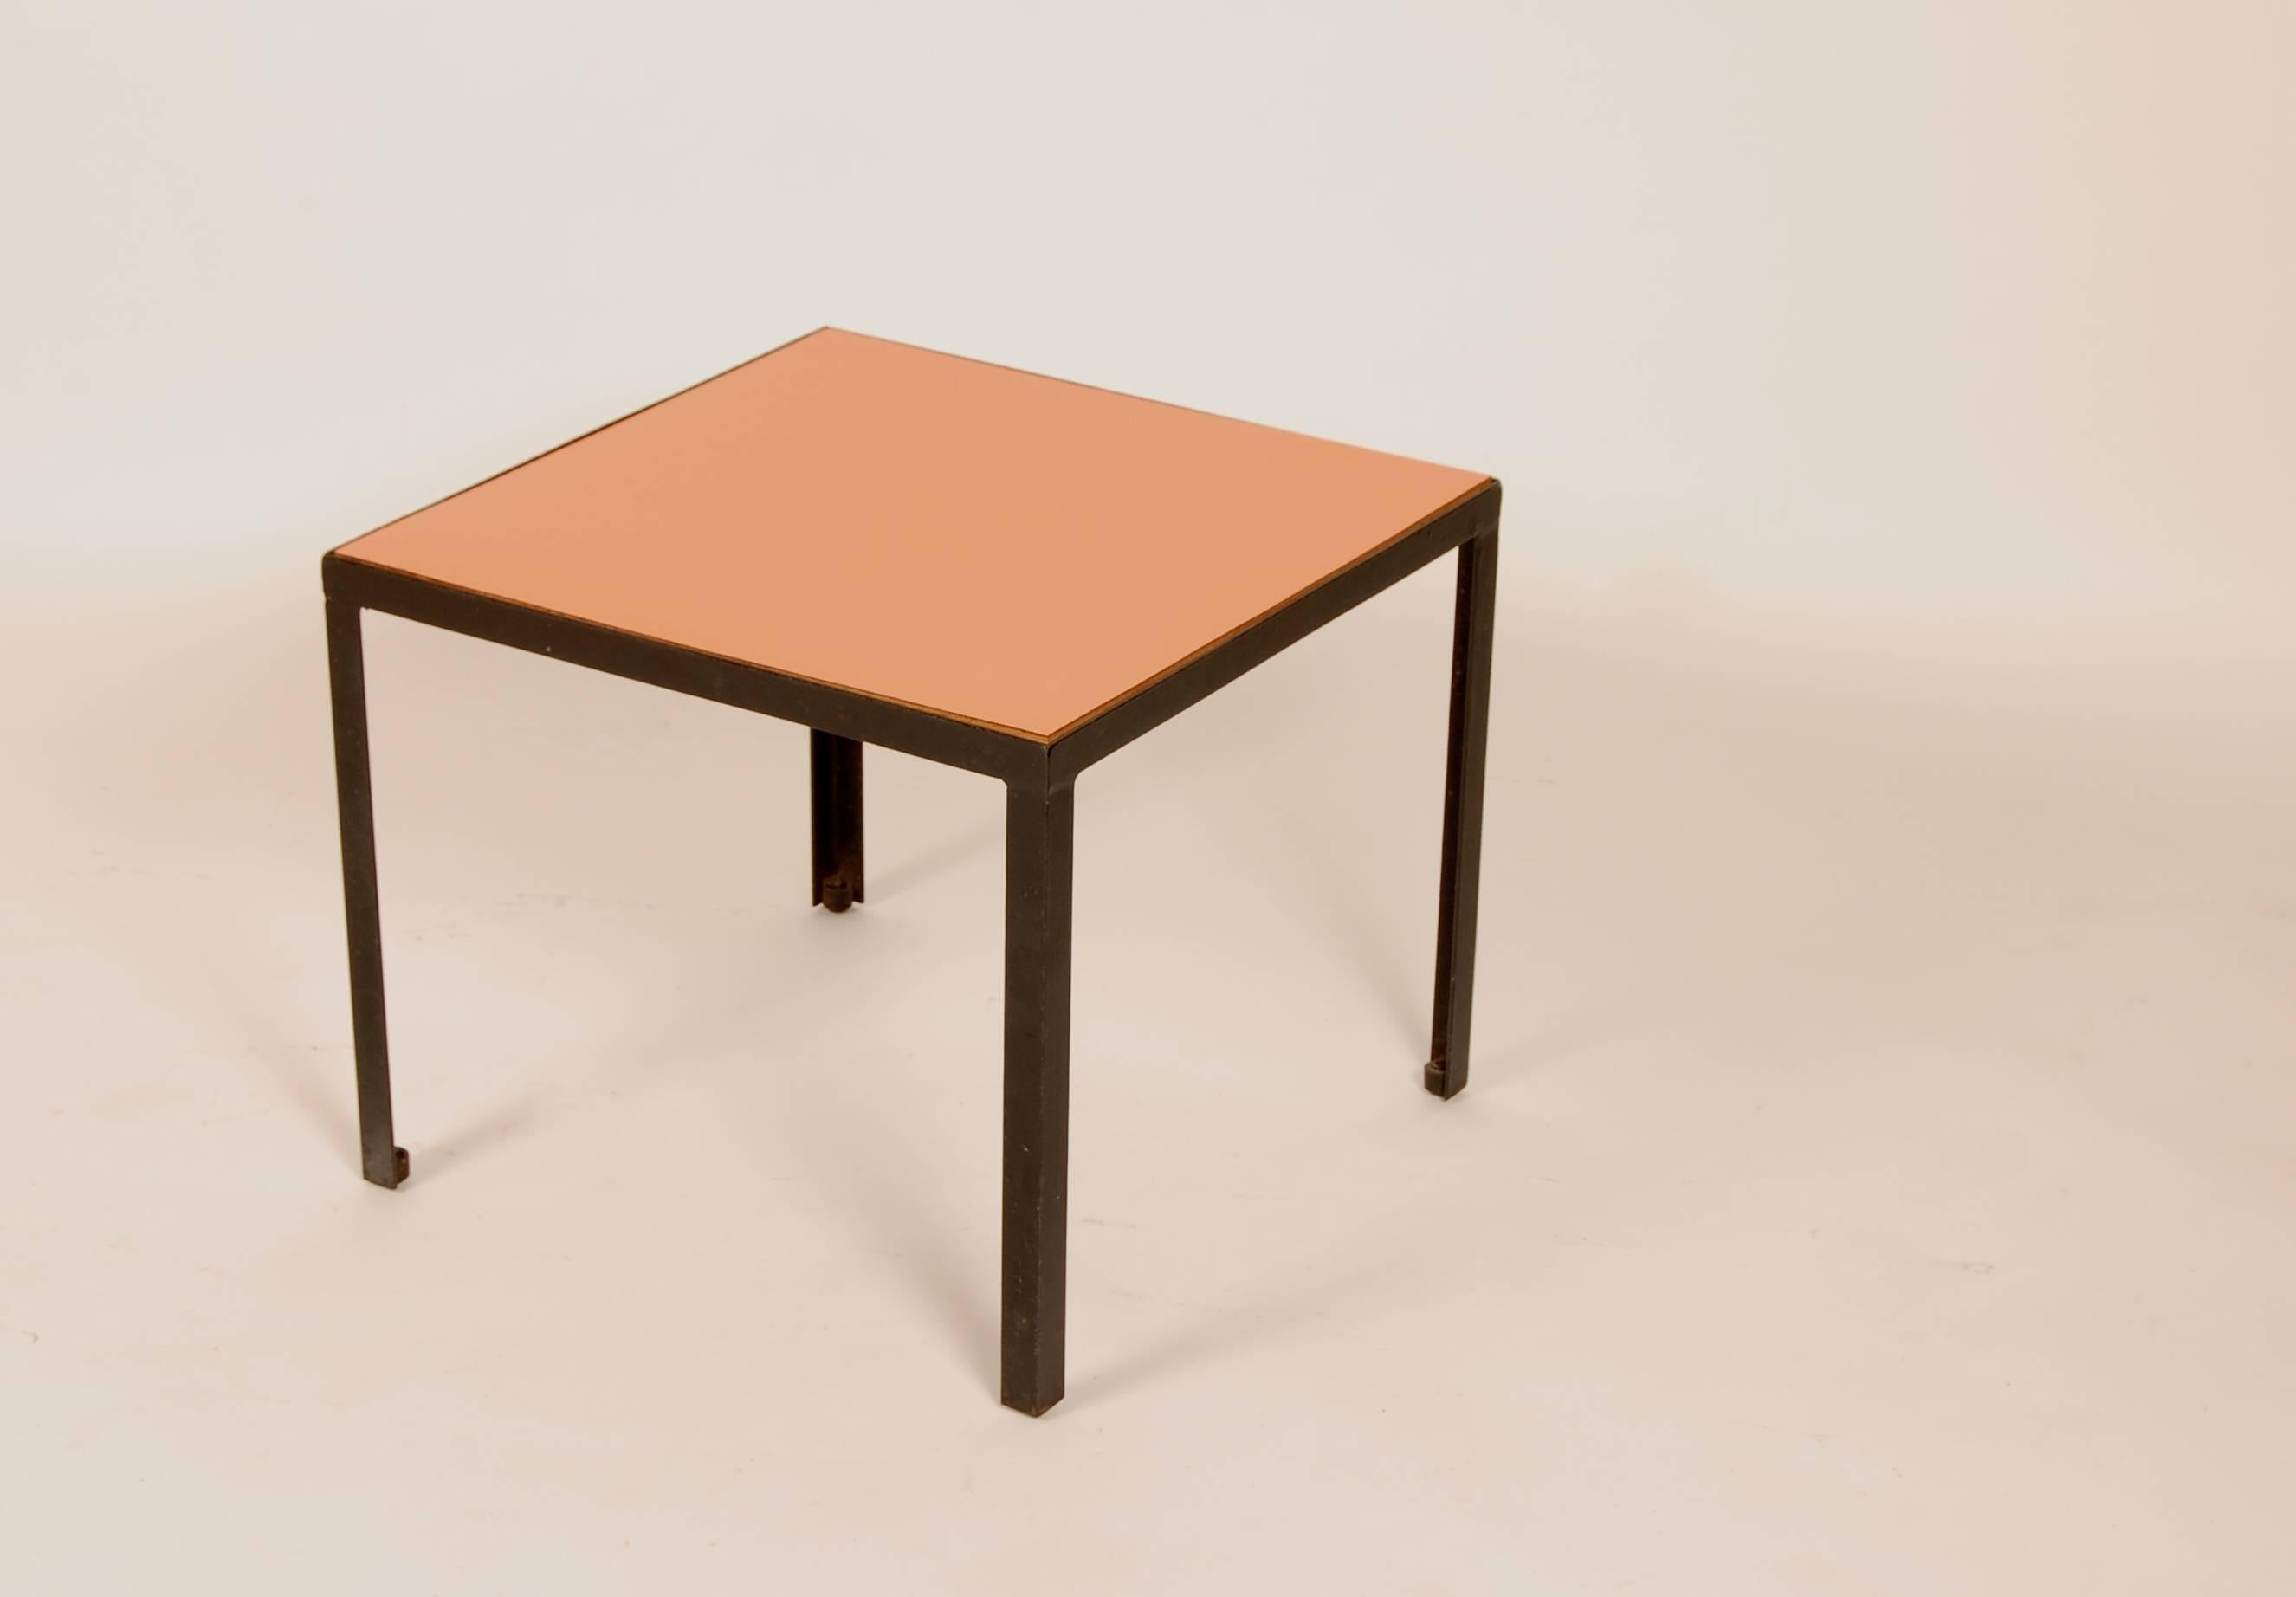 Petite side by 1950s California designer Muriel Coleman who's company was based in Berkeley, California and was part of the Pacifica Group. Square top with angle iron legs, the color of the laminate top is pale soft salmon / red color.